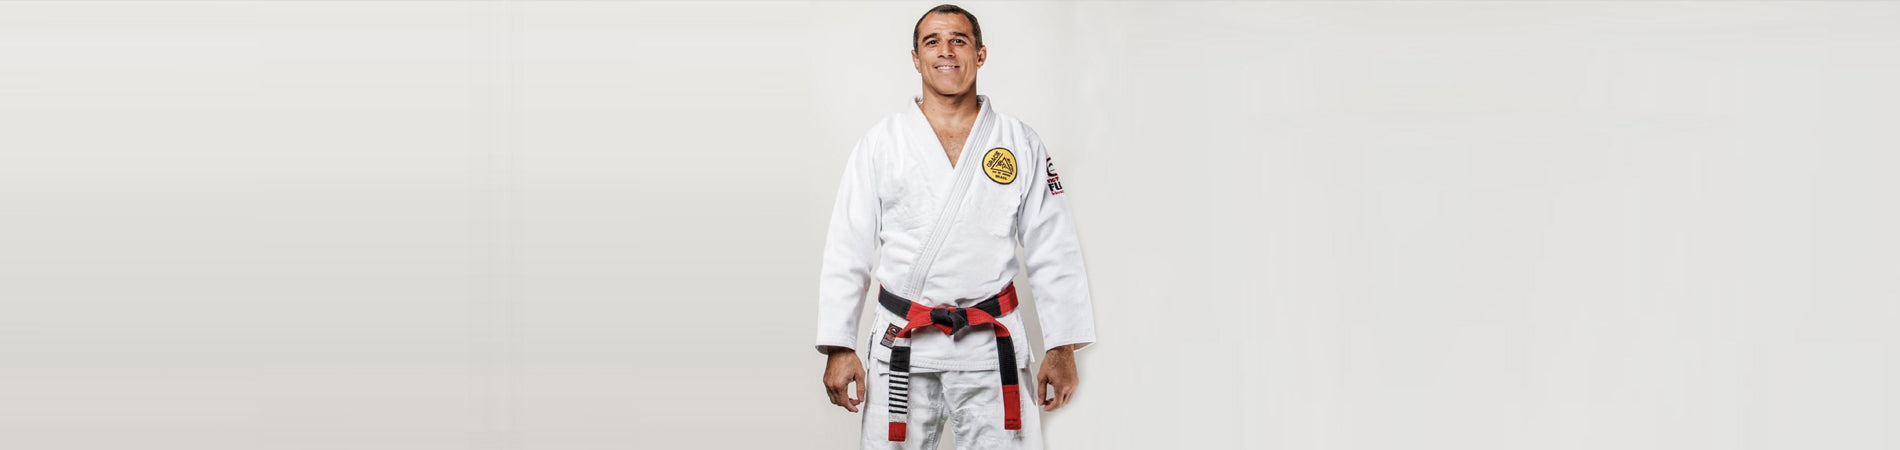 Royler Gracie Joins the ADCC Hall of Fame